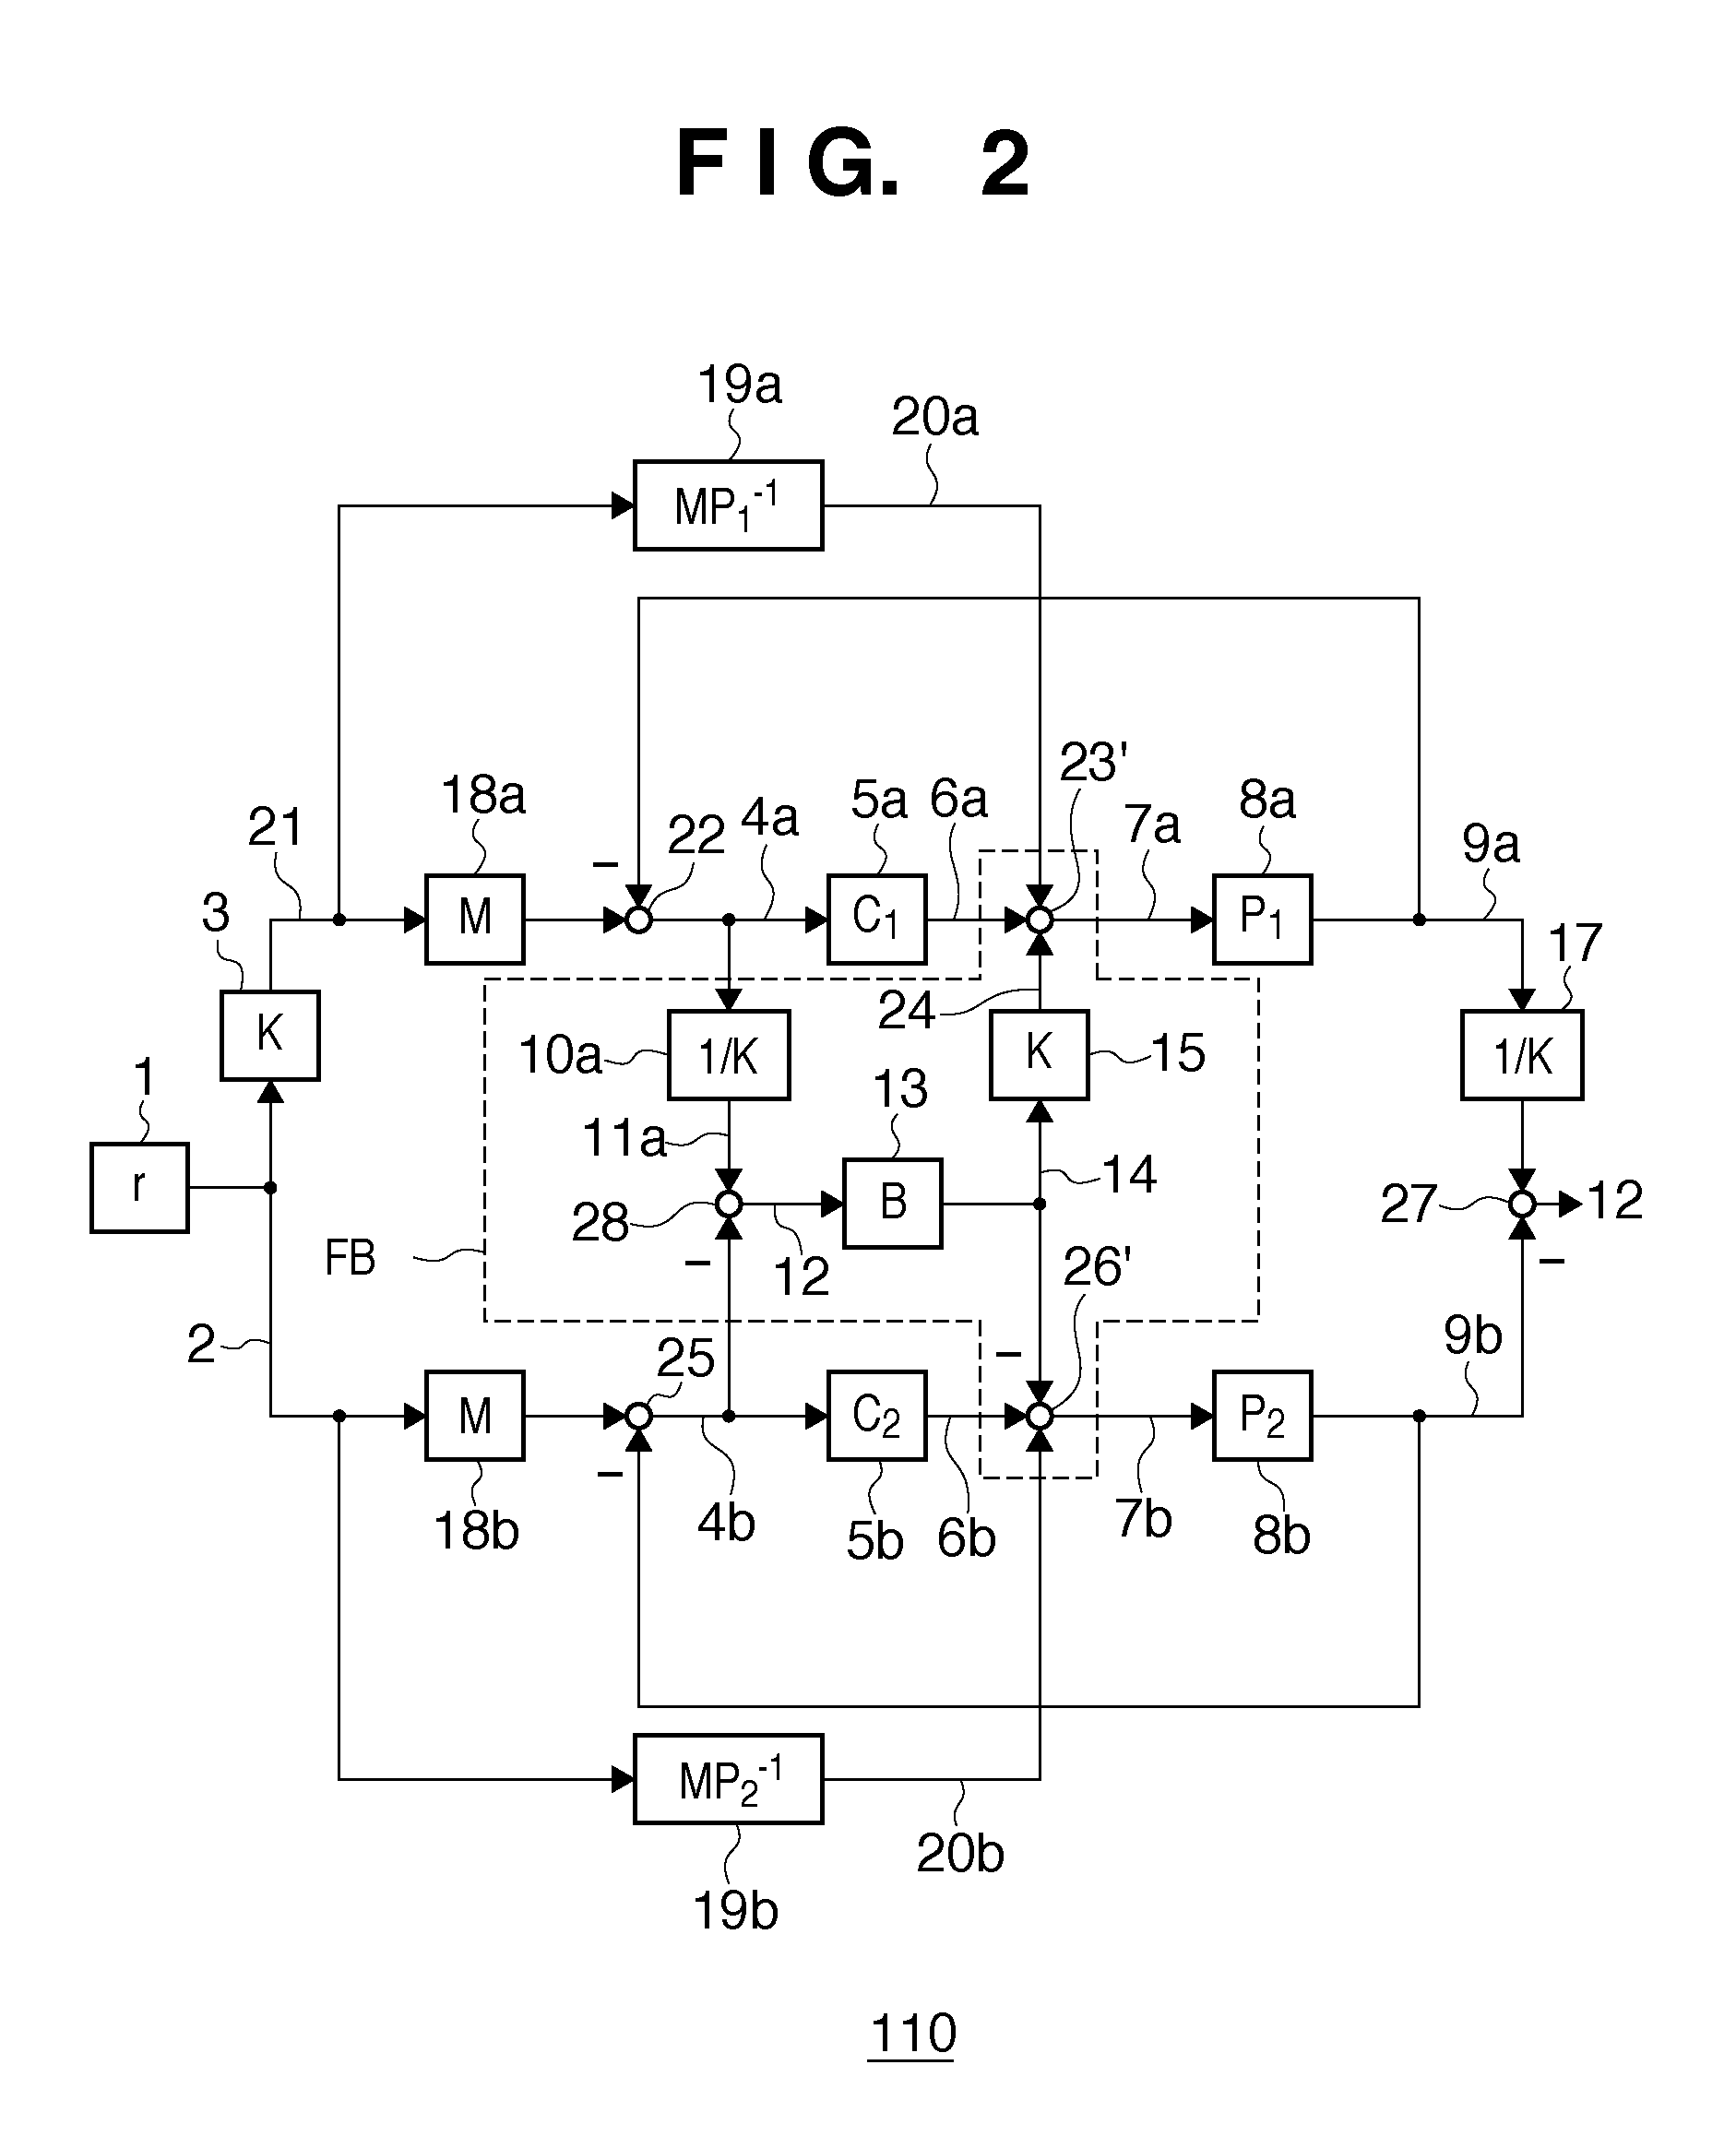 Scanning exposure apparatus, control apparatus and method of manufacturing device